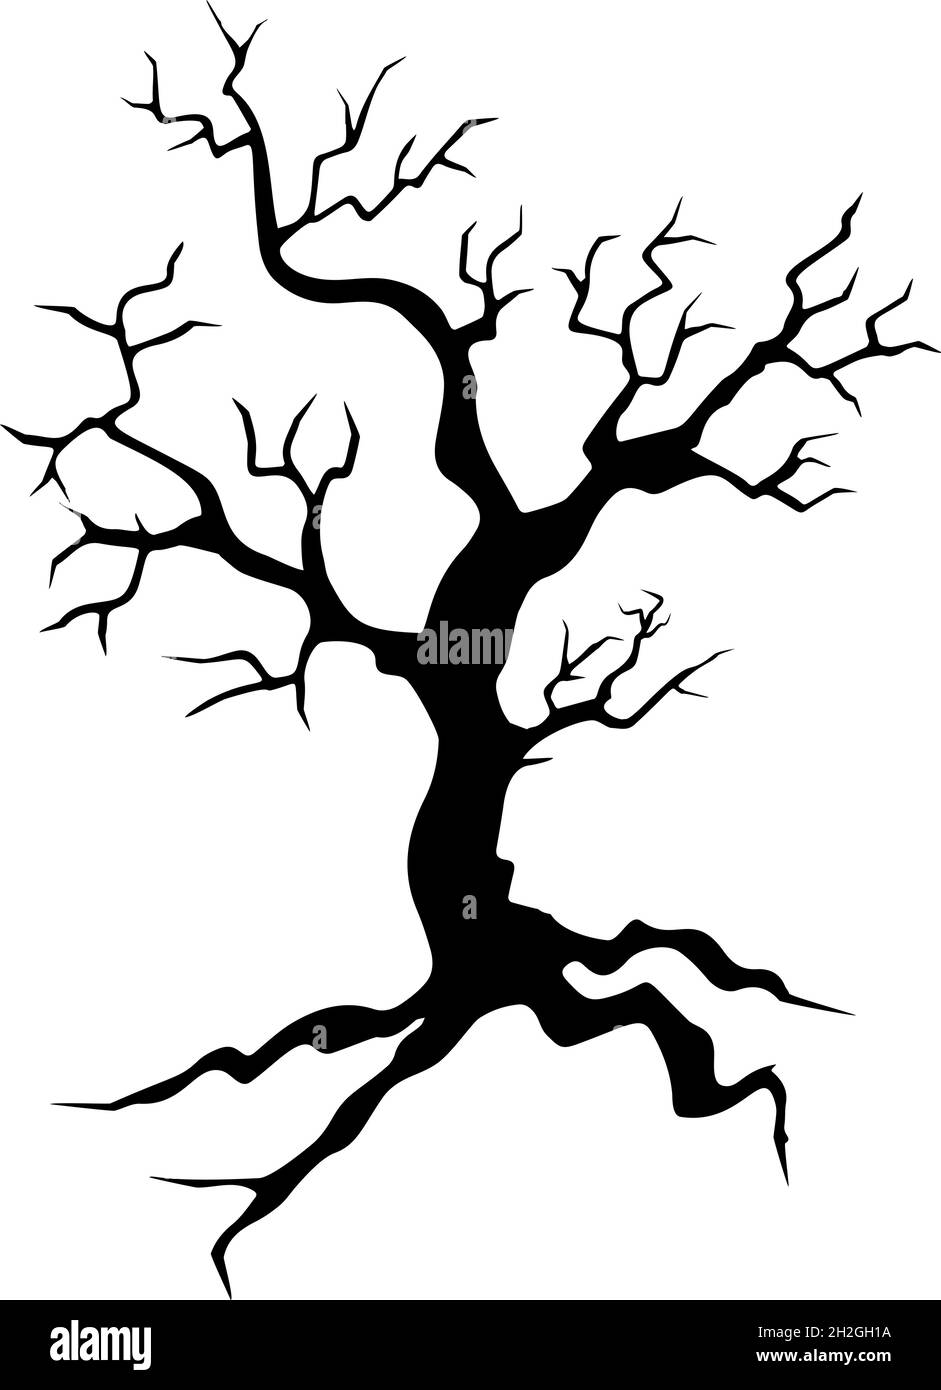 Black silhouette of a gnarled dry tree on a white background. Stock Vector